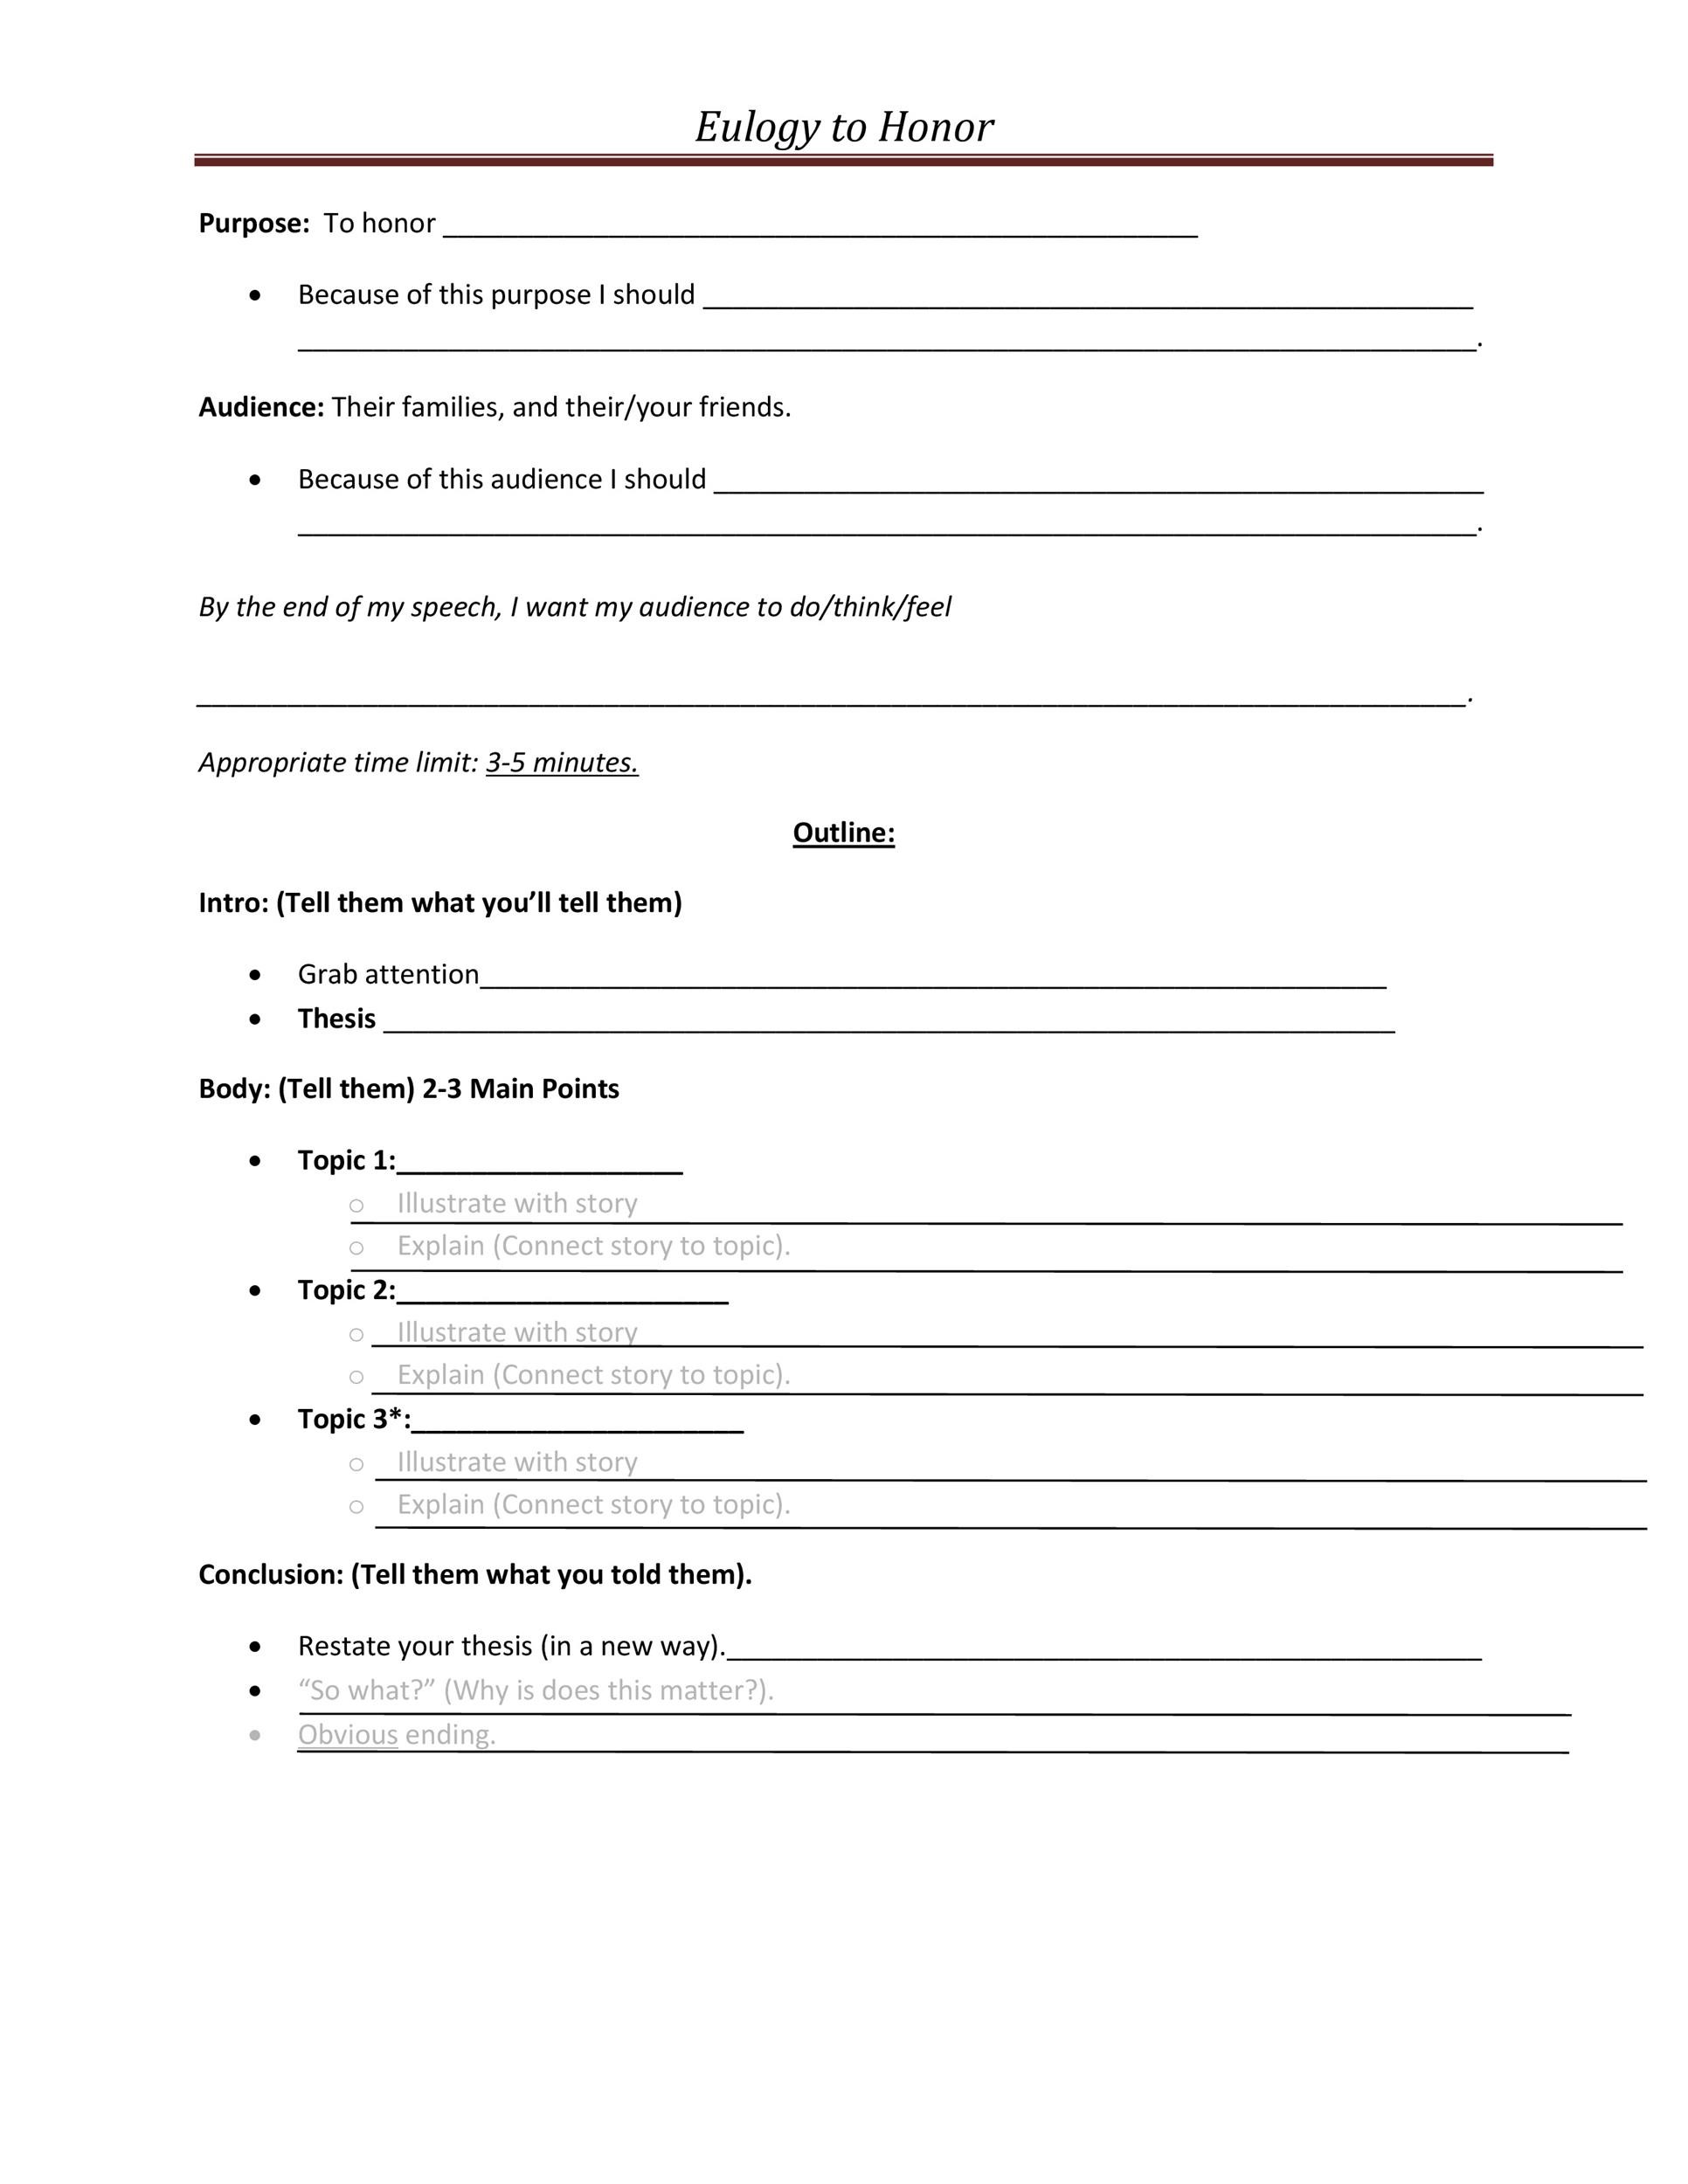 eulogy-outline-template